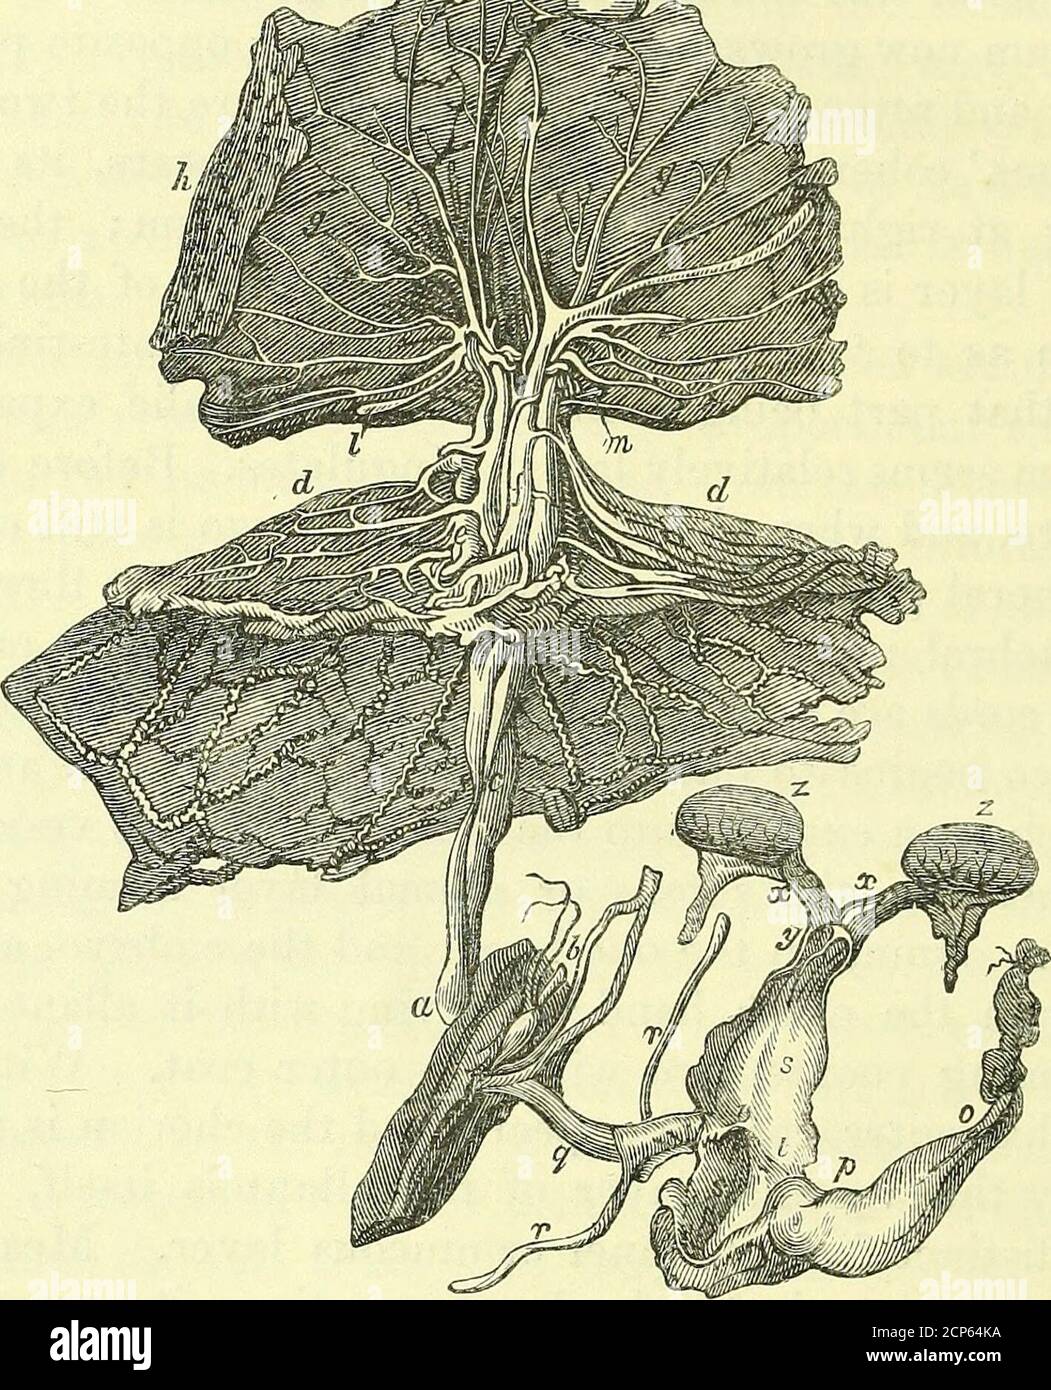 . On the anatomy of vertebrates [electronic resource] . Perisso- and a few Artio- dactyles shortvillous processes bud out from a greater part of the superficies ofthe chorion, and a co-extensive minutely alveolar growth of thelining substance of the uterus receives them. Fig. 574 represents the foetal membranes and appendages 1 xx. vol. v. p. 20, pi. 59, fig. 7. Later German Embryologists have called the one serous or animal layer, the other mucous, vegetal or organic layer ; but, anyof these terms can only be understood in an arbitrary sense. See Vol. II. p. 259, fig. 1 33.2 lb. p. 20. 3 ccxx Stock Photo